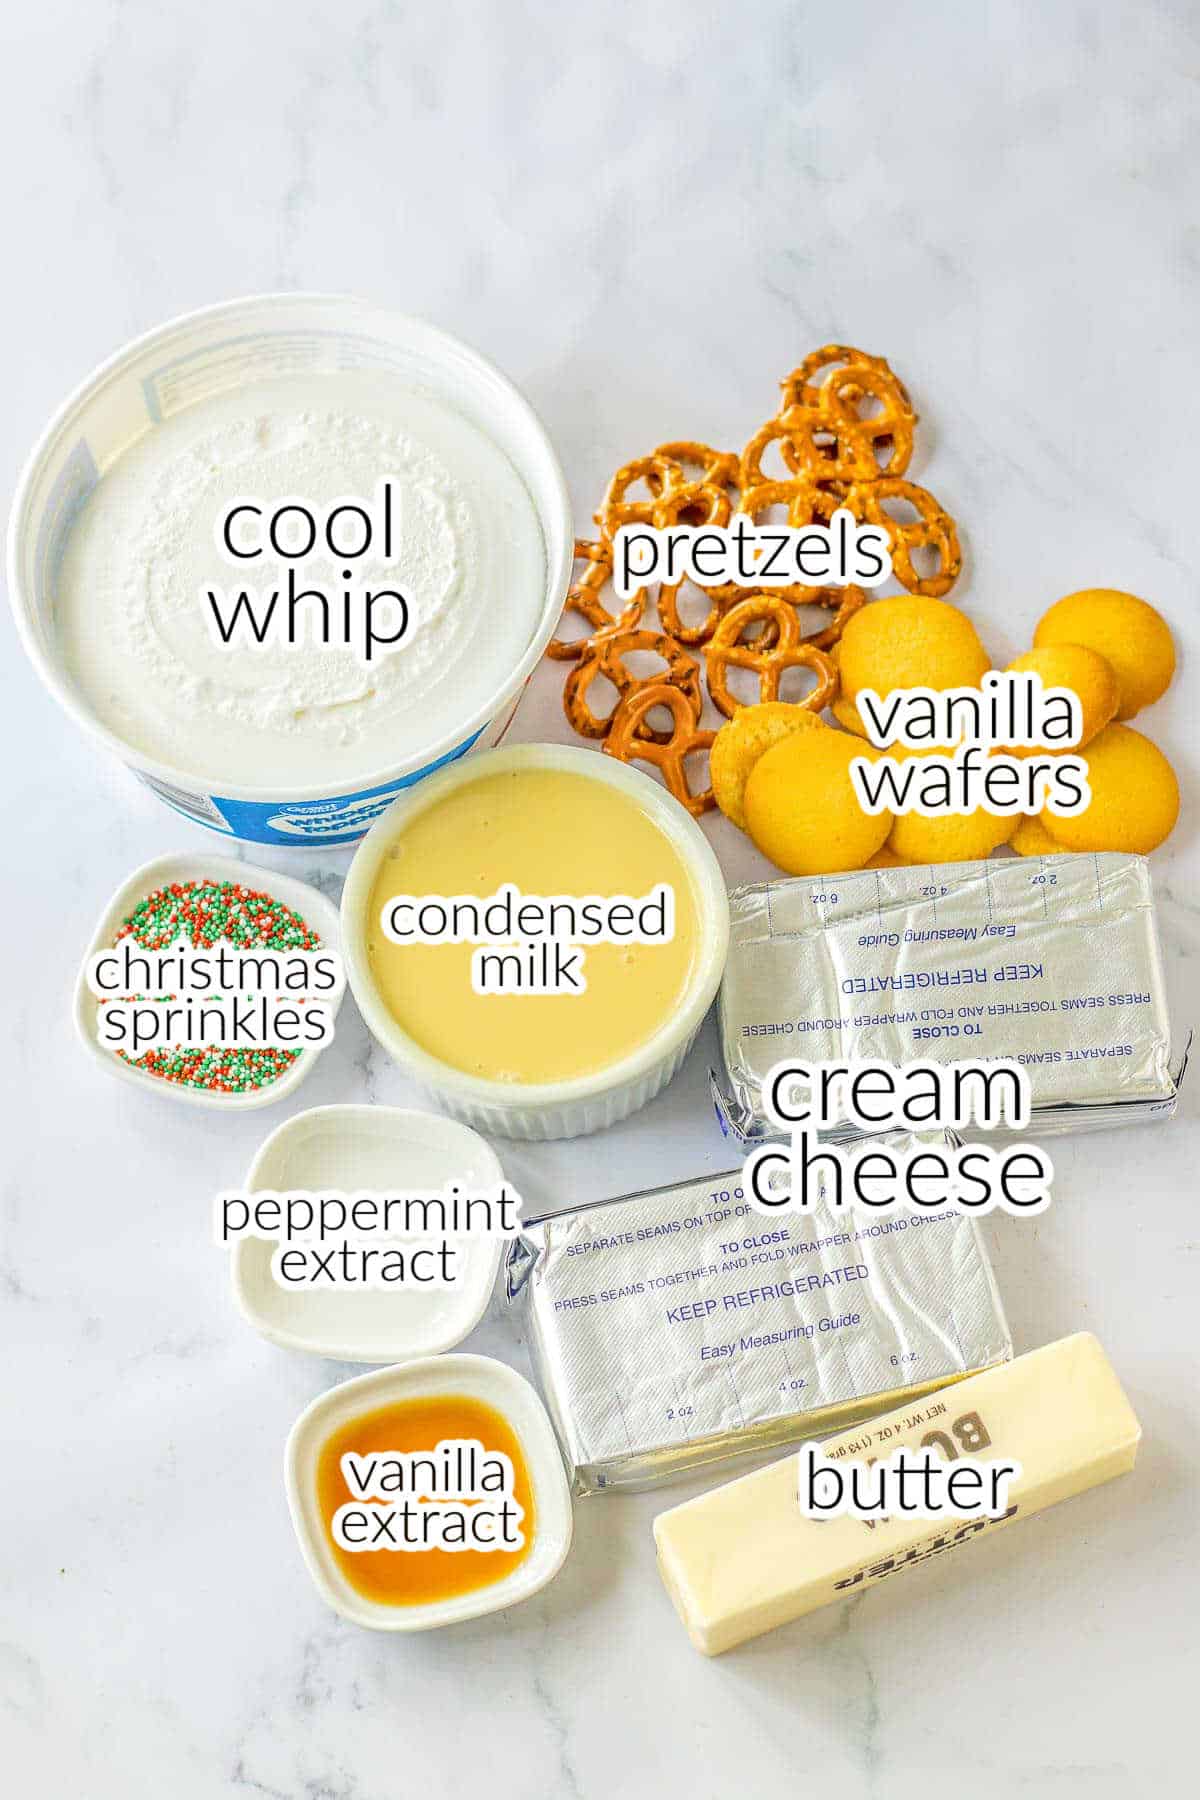 ingredients for Christmas crunch cake - cool whip, pretzels, vanilla wafers, condensed milk, christmas sprinkles, cream cheese, peppermint extract, vanilla extract and butter.